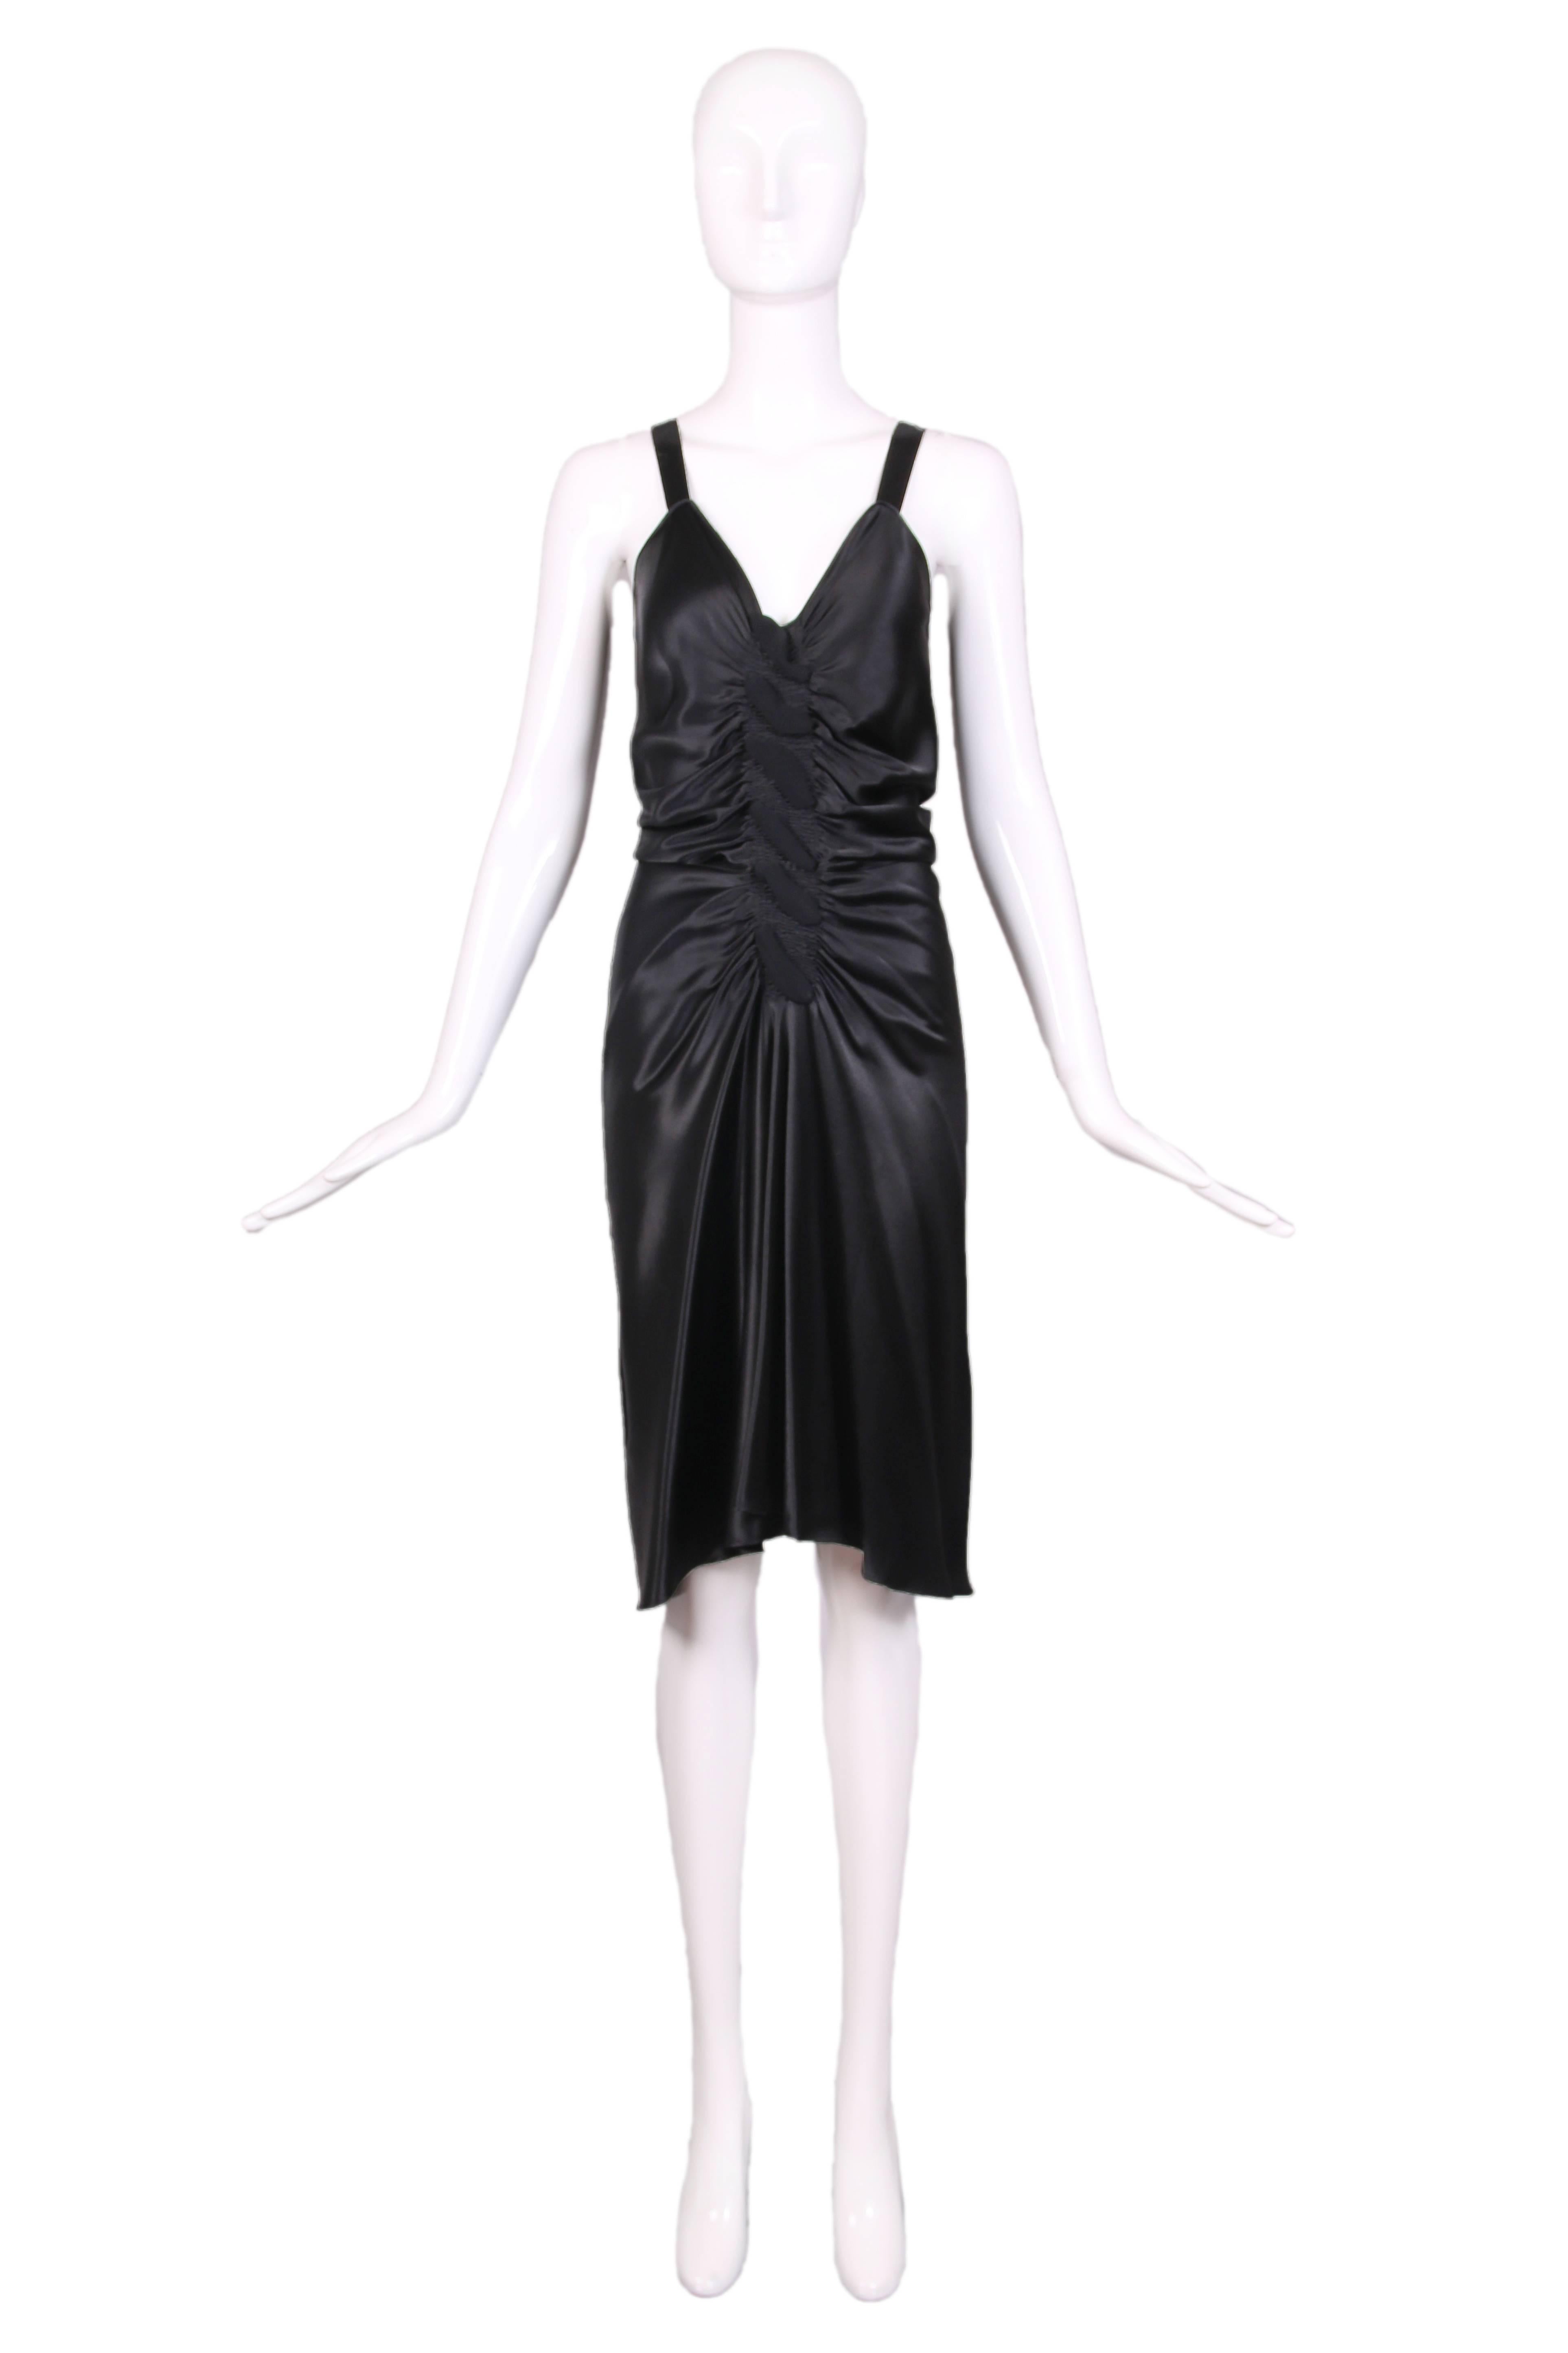 Vintage John Galliano black bias cut cocktail dress w/ frontal ruching, deep V-neckline, and shoulder straps. Fabric-covered button closure at back. In excellent condition. Size US 4.
MEASUREMENTS (in inches):
Bust - 32
Waist - 27
Hip - 40
Length -